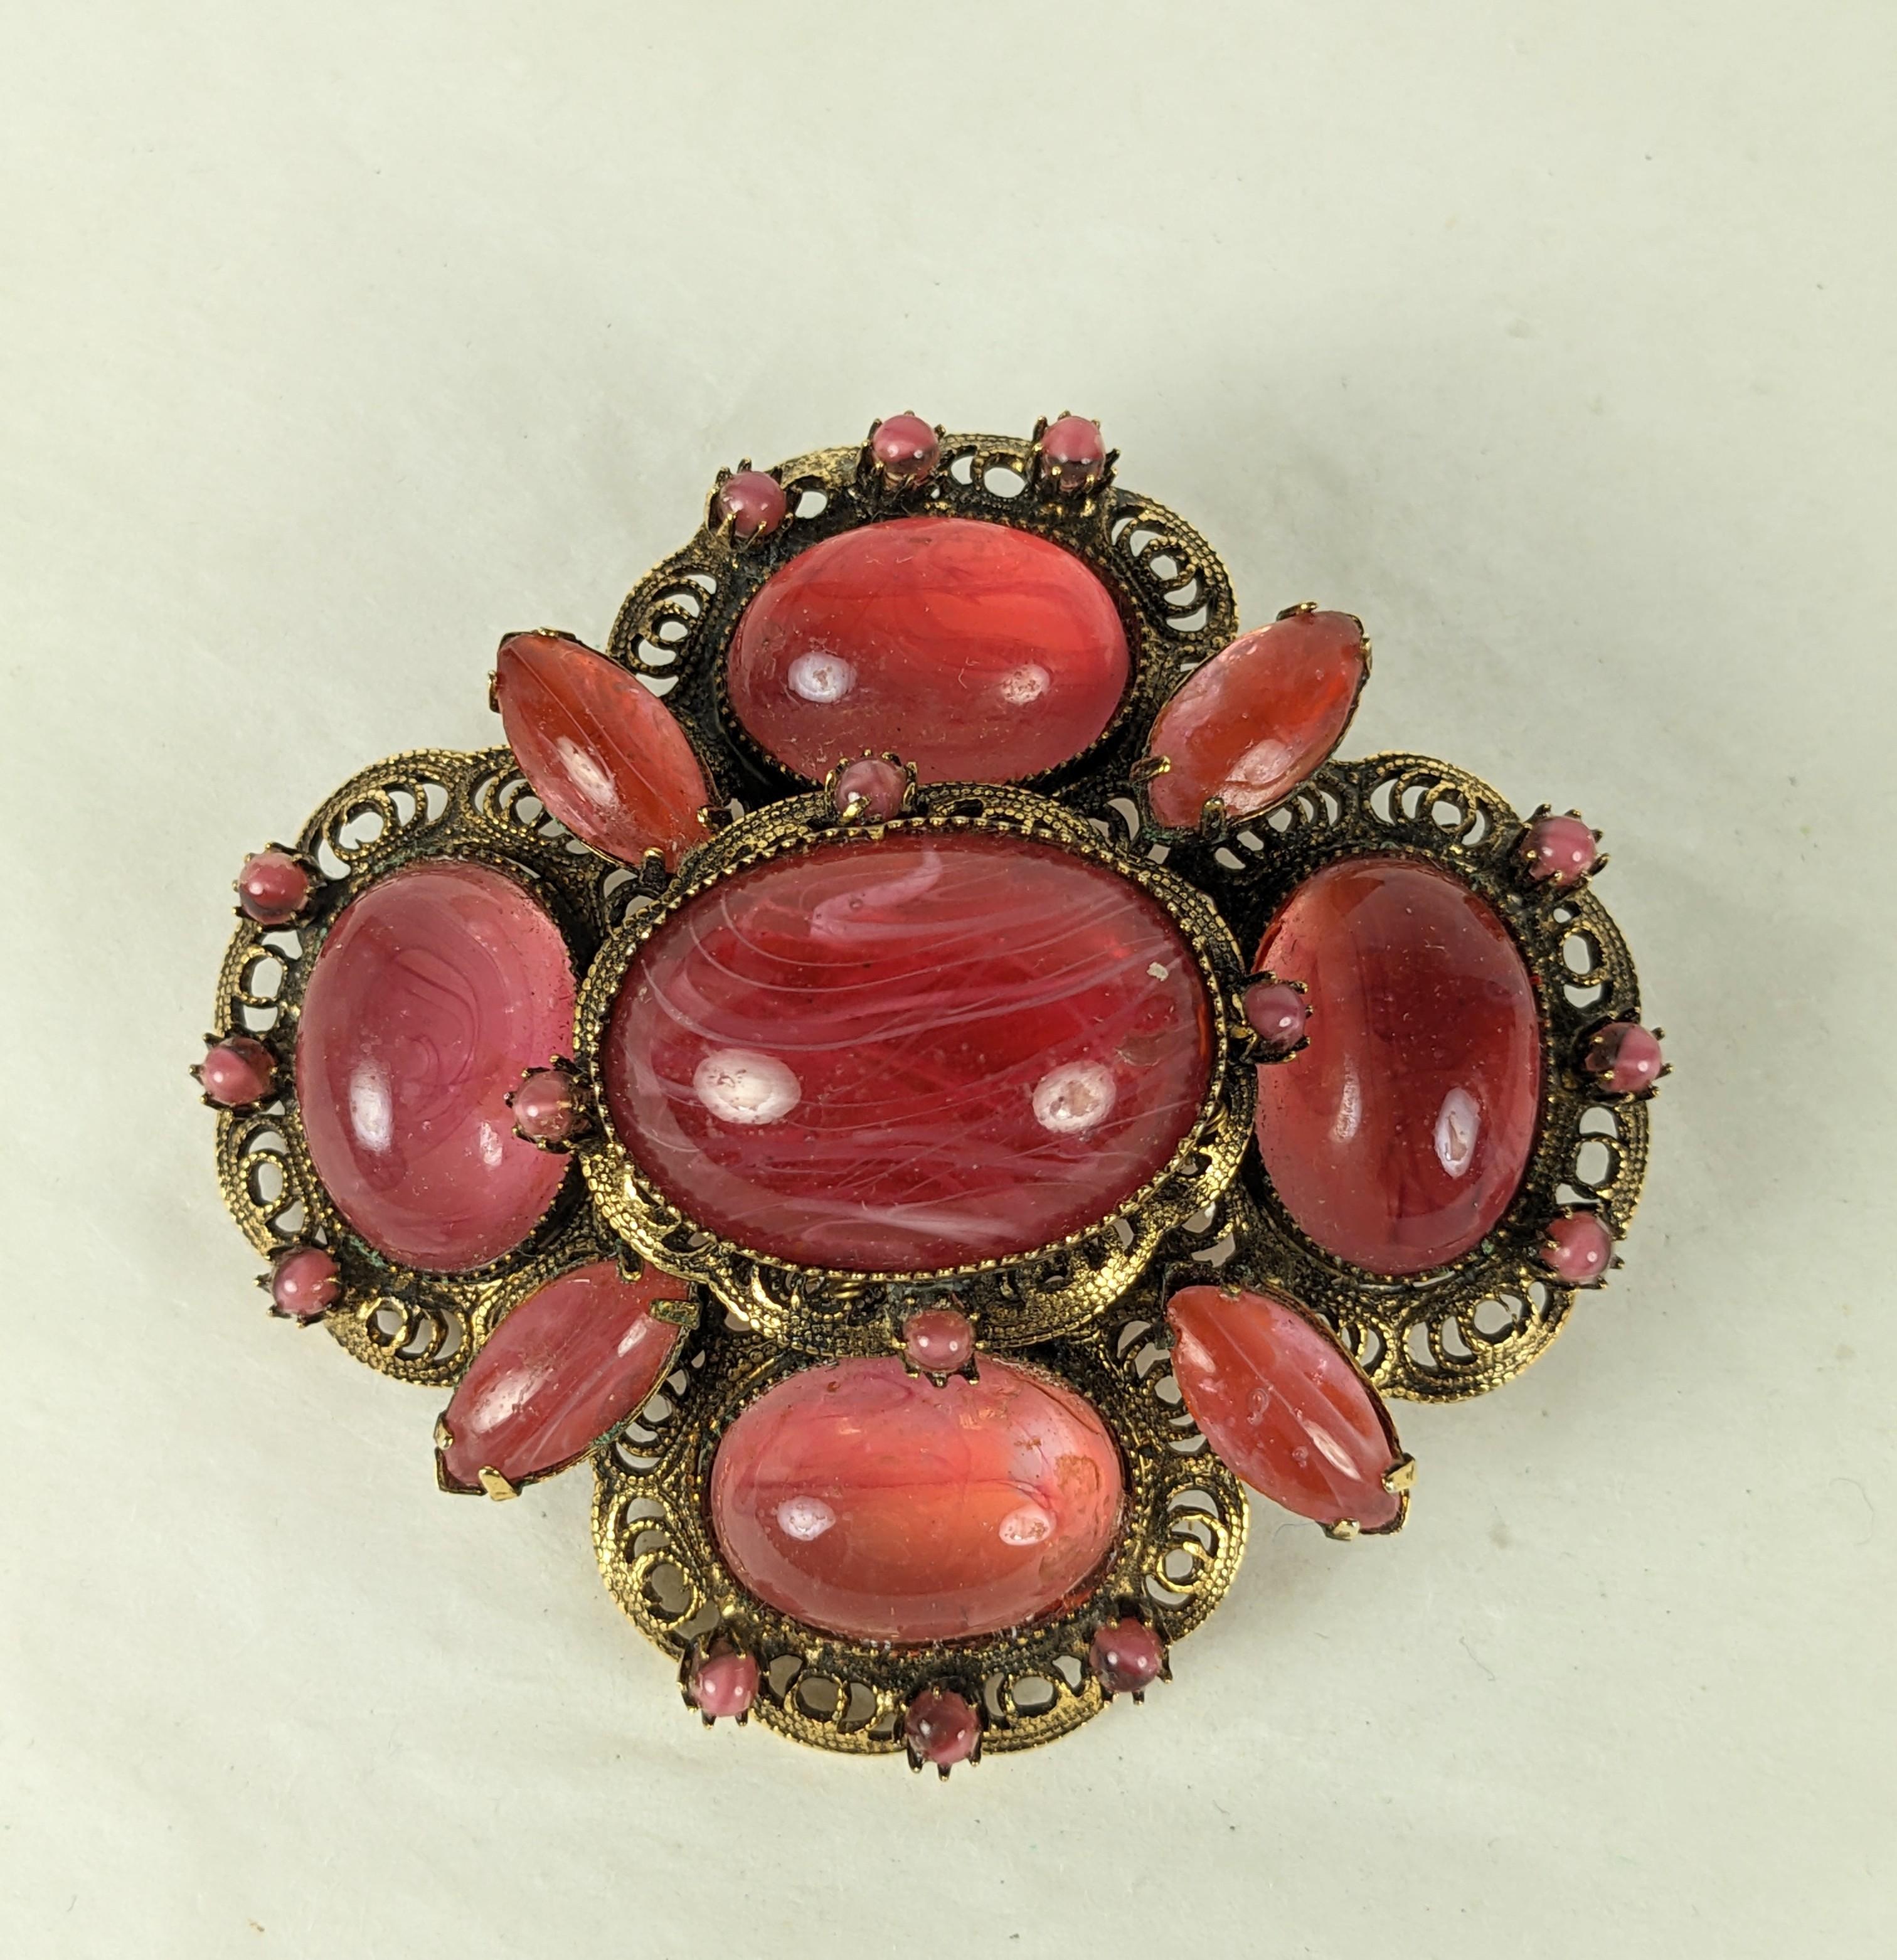 Striking Robert Jeweled Filigree Brooch from the 1950's. Orangey rose quartz colored cabochons set in antique filigree metal. 2.5